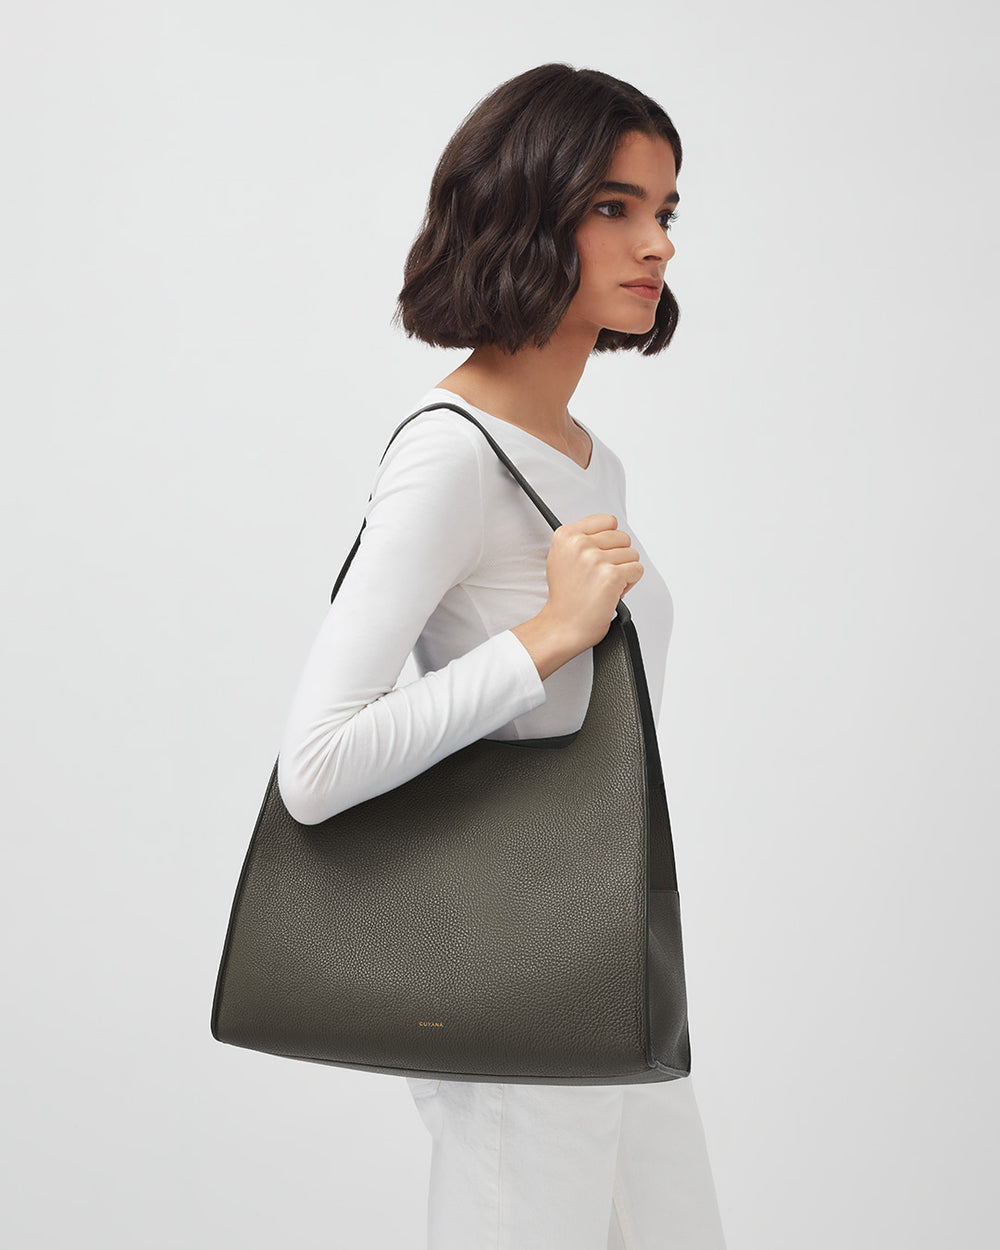 Woman carrying a large tote bag, looking to the side in studio.